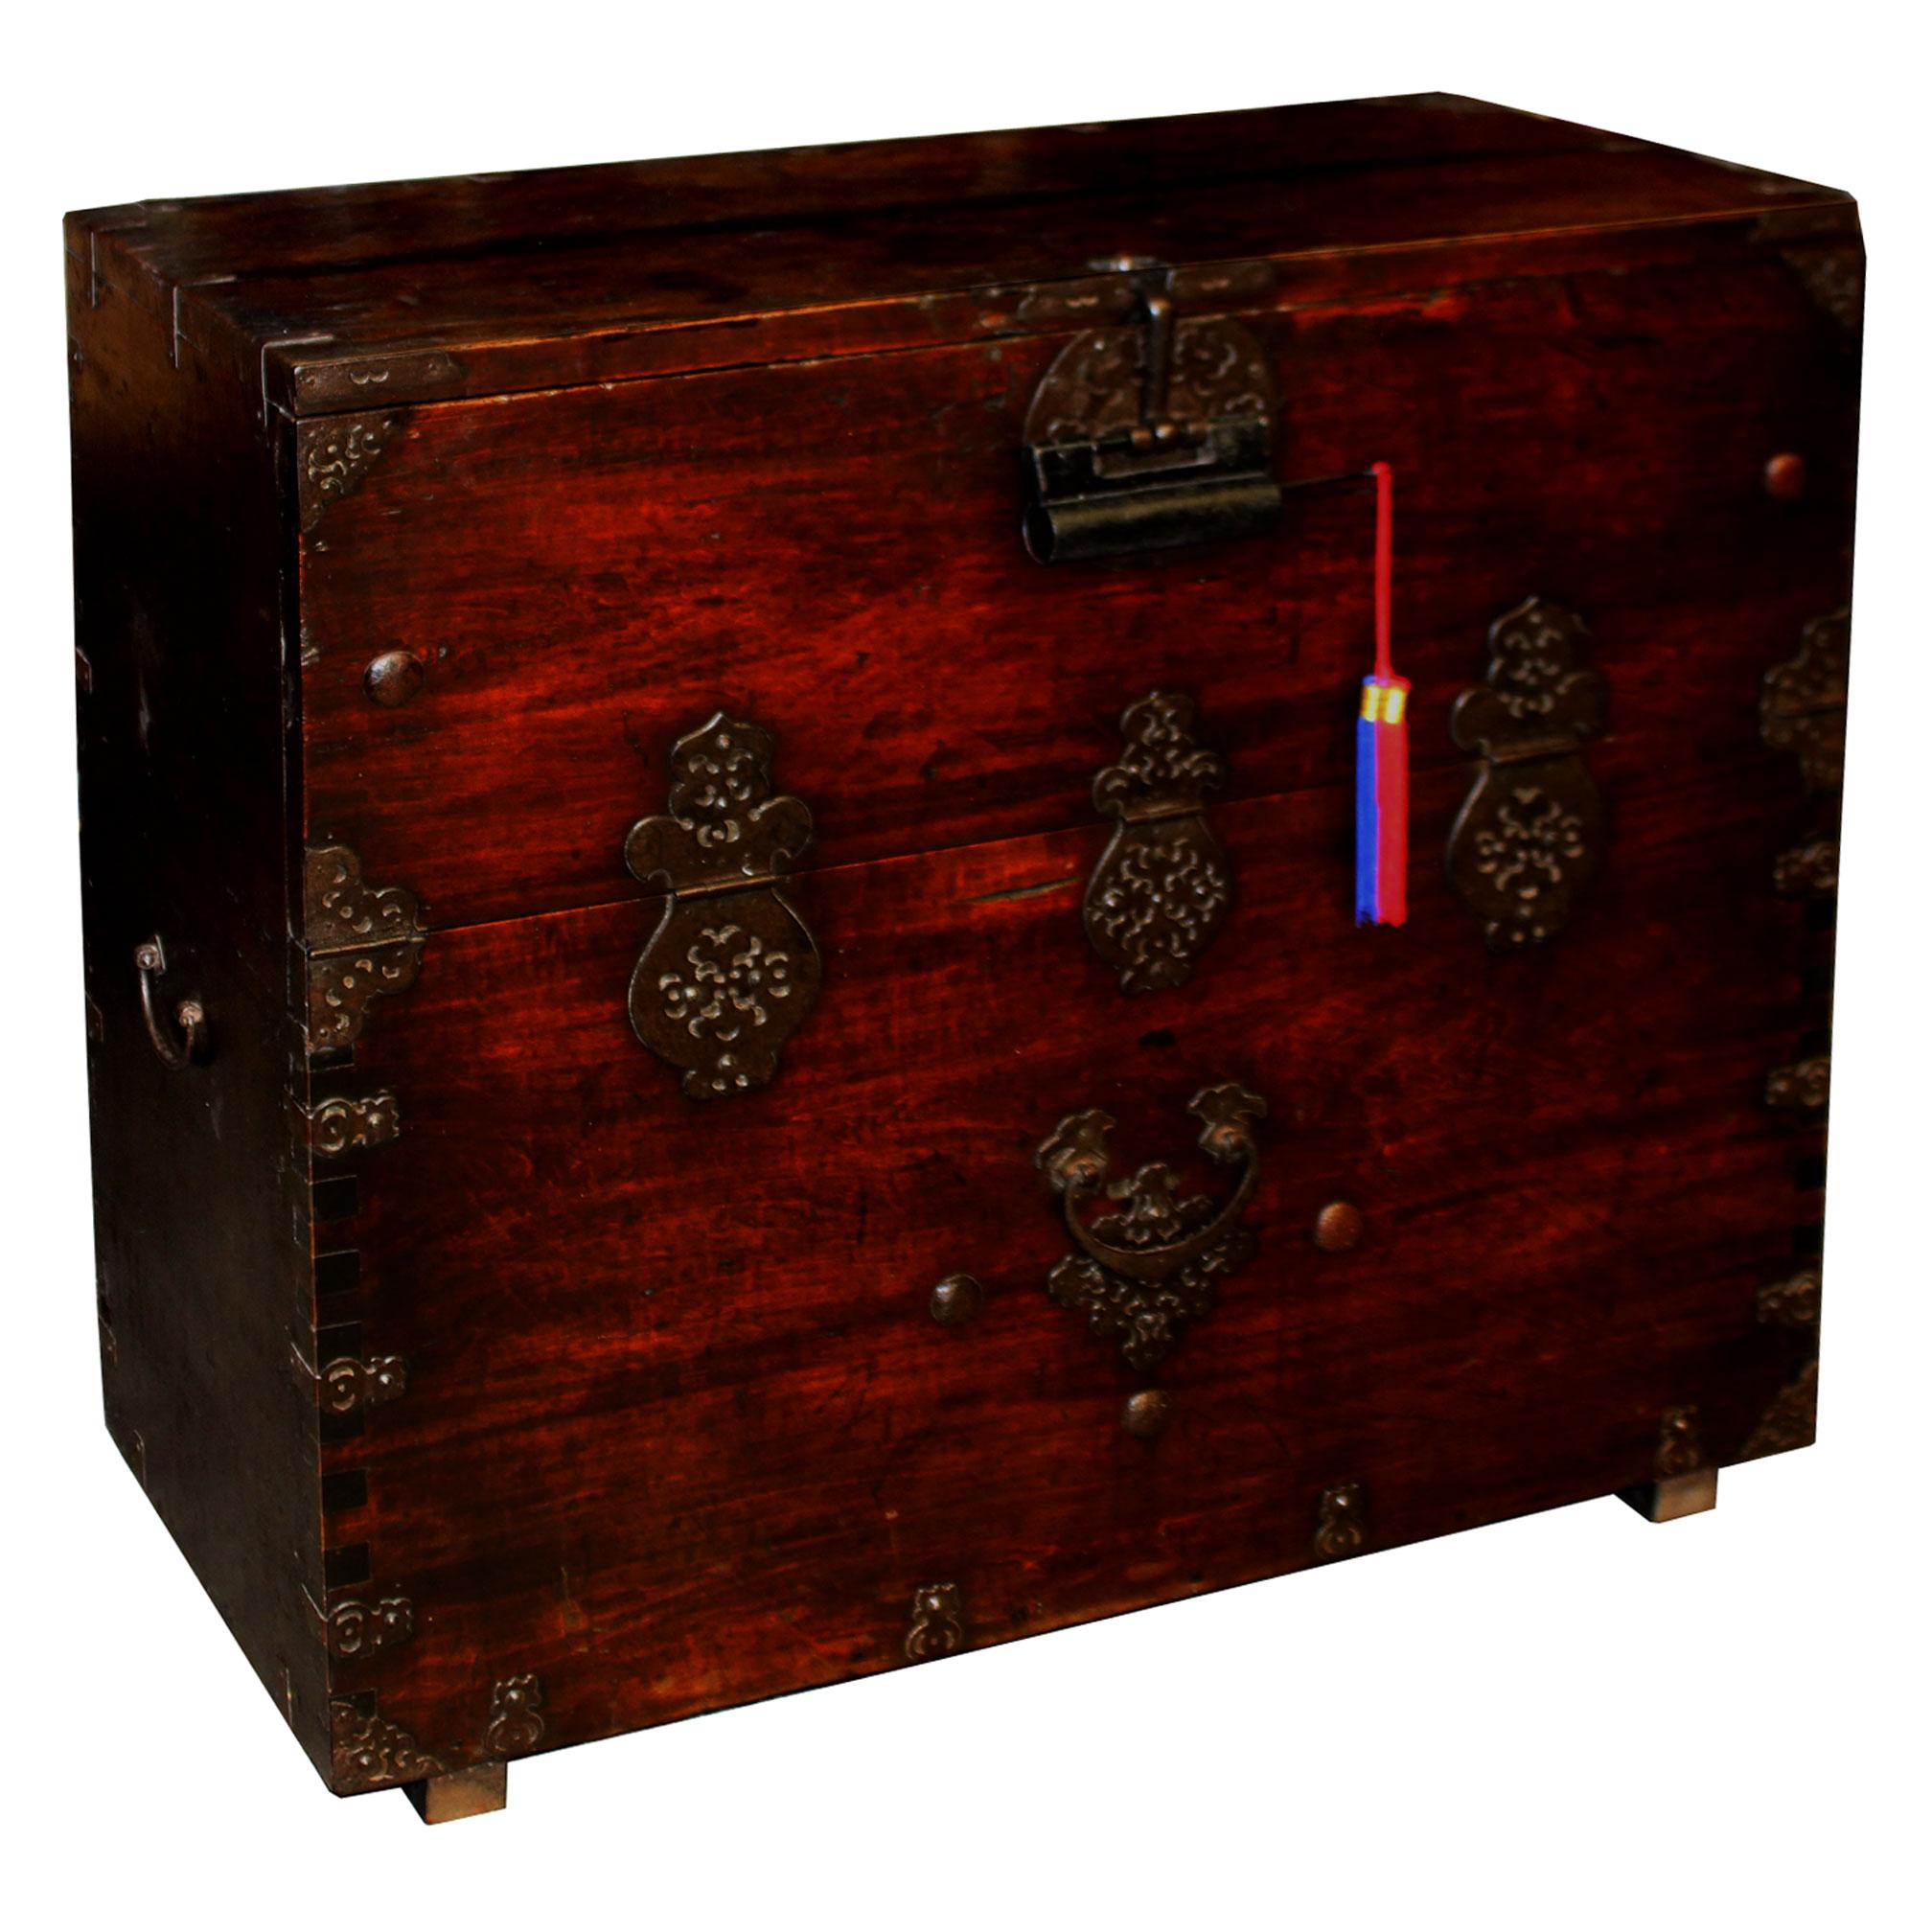 Korean Bandaji (blanket chest). Every Korean household had a bandaji to store blankets for sleeping. Made of pine wood with original iron hardware depicting treasure vases for good fortune.
Handsome chest can be used in an entry or as a bedside